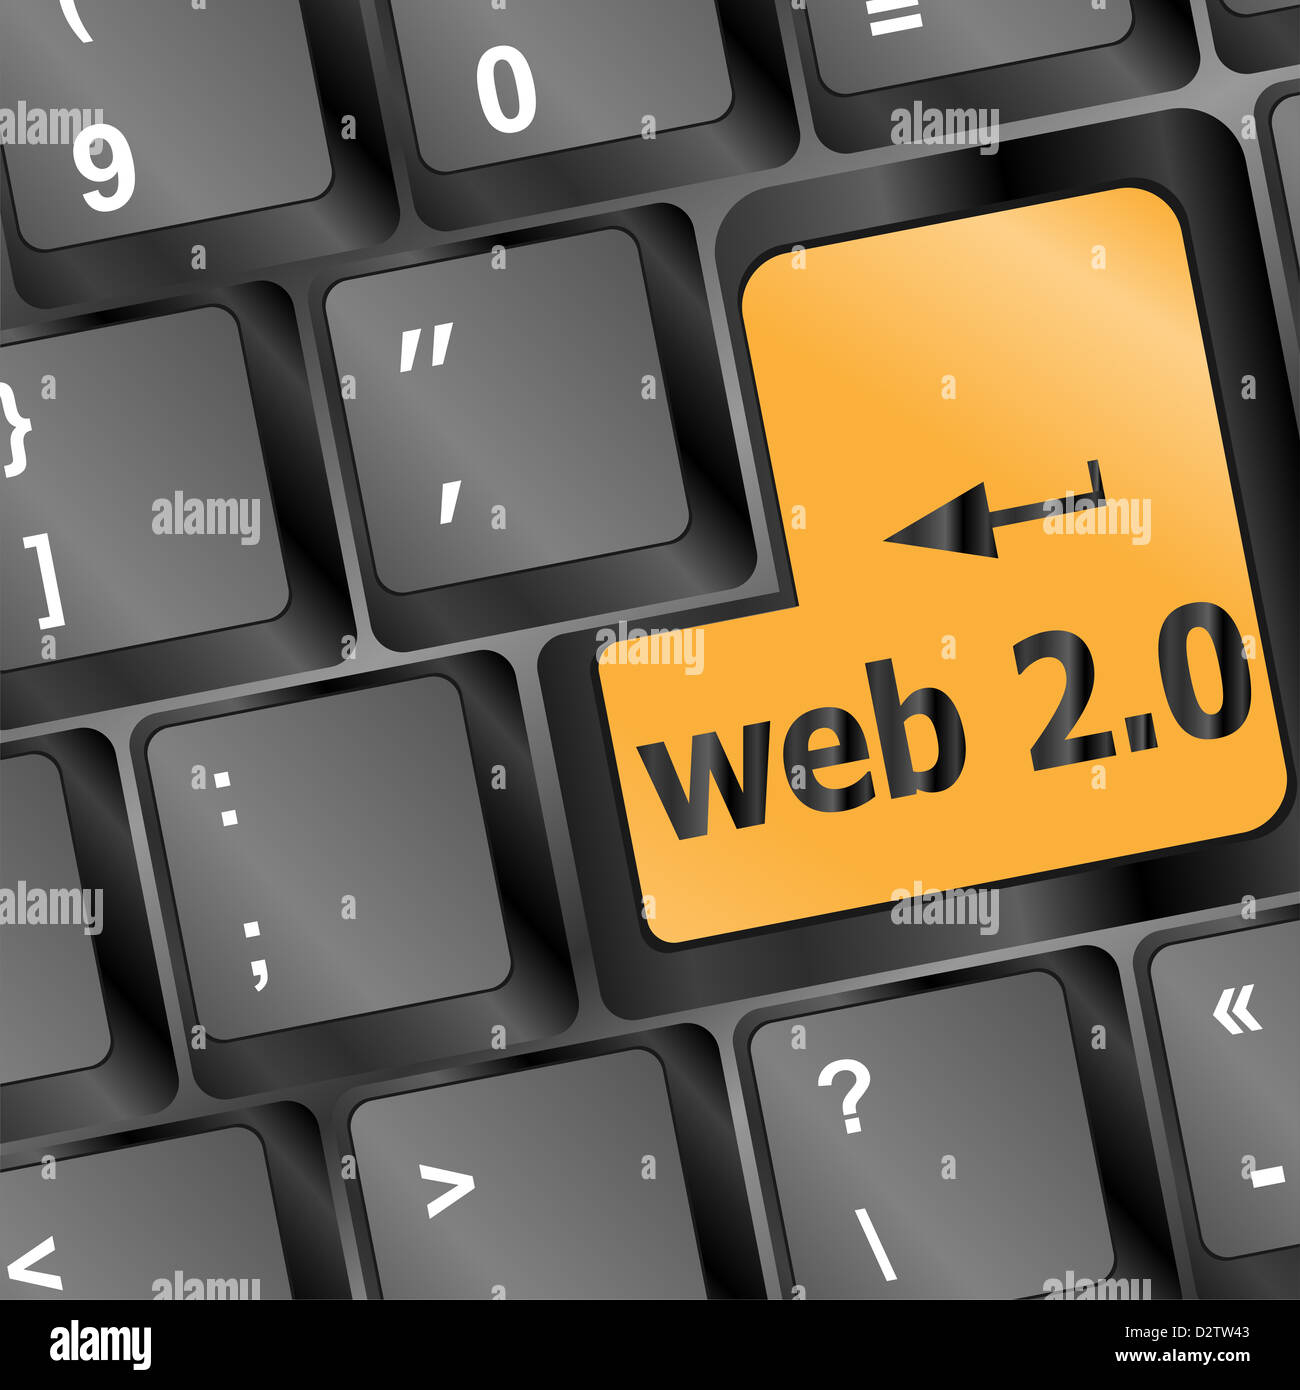 Web 2.0 computer key in yellow showing social medias Stock Photo